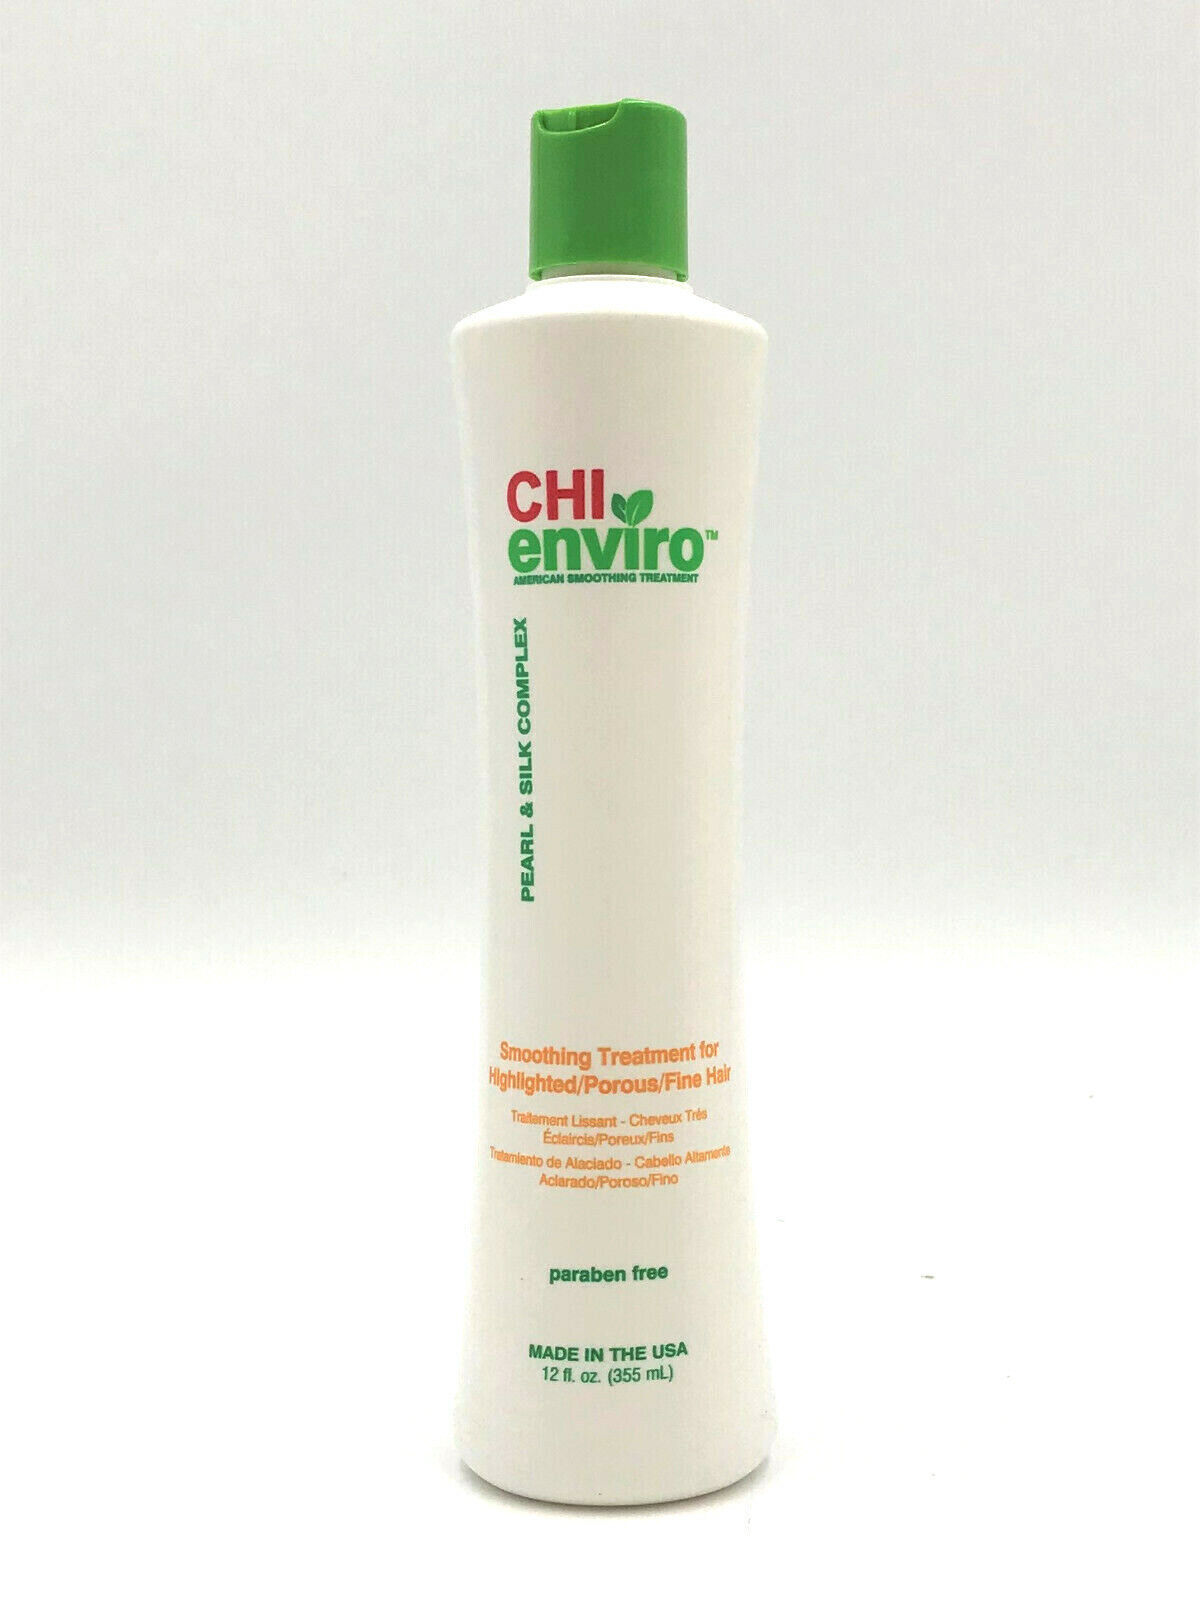 CHI Enviro Smoothing Treatment For Highlighted/Porous/Fine Hair 12 oz - $89.05